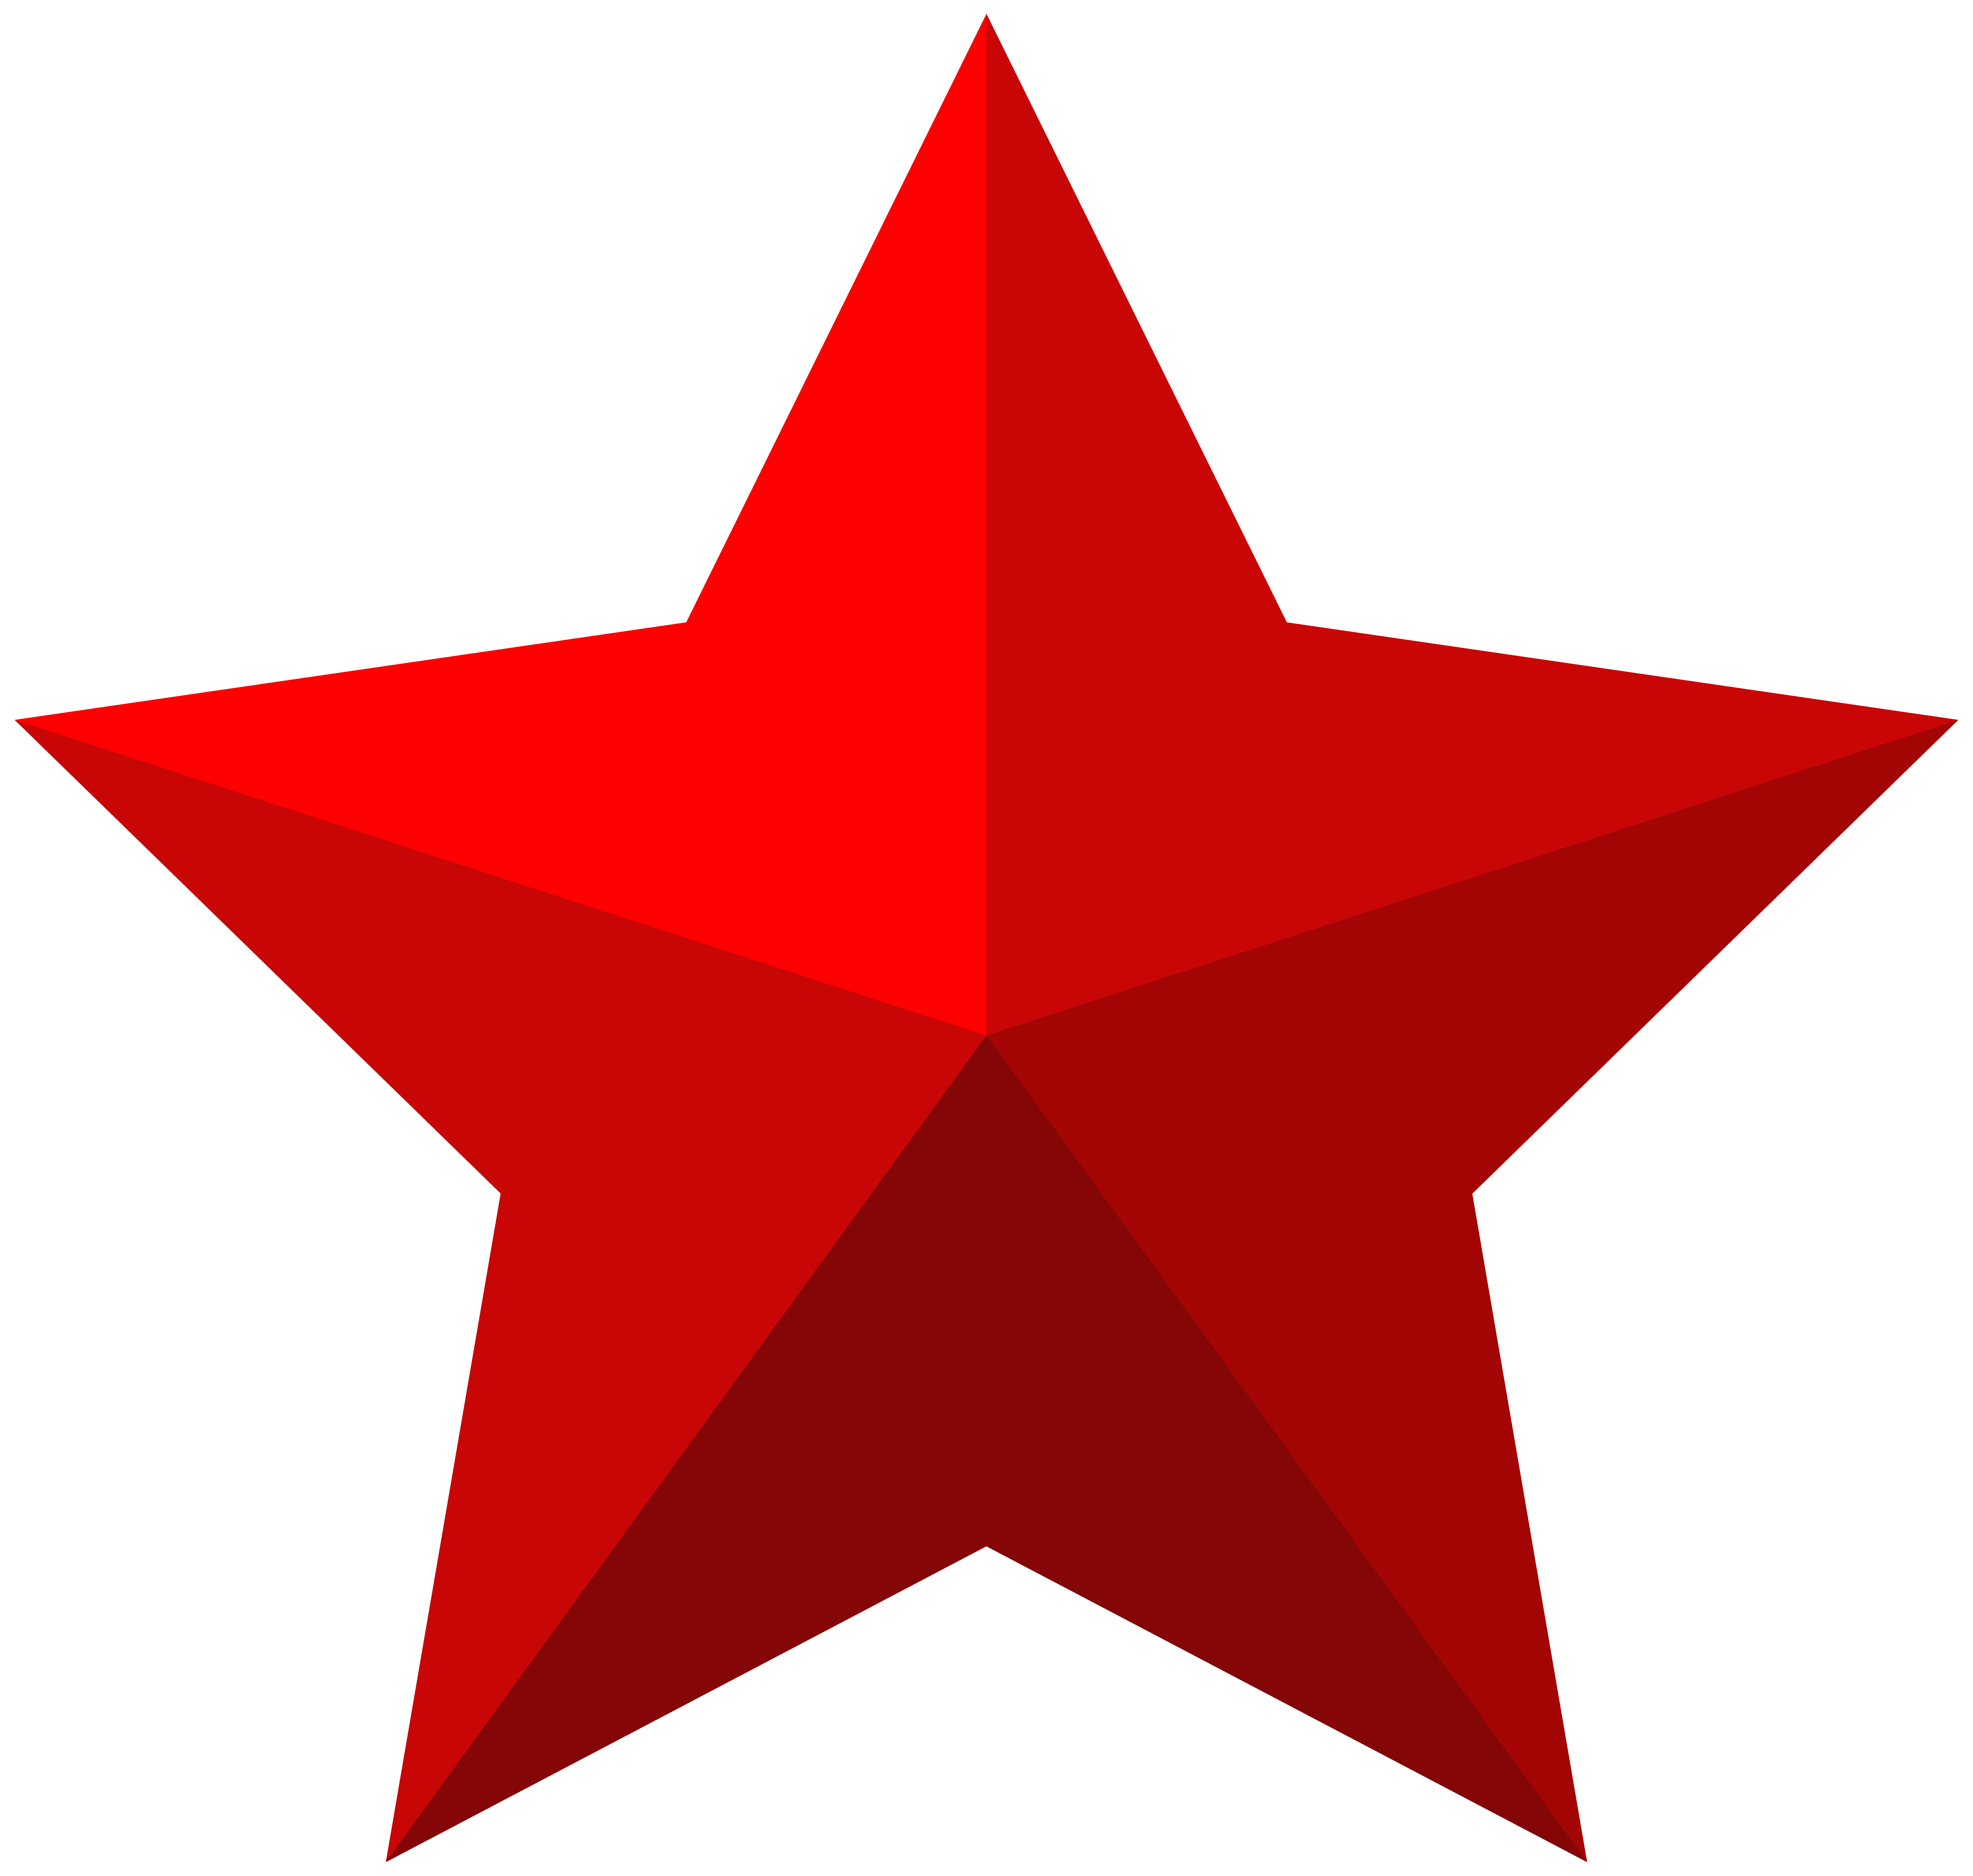 Star PNG Image File Vector, Clipart, PSD.